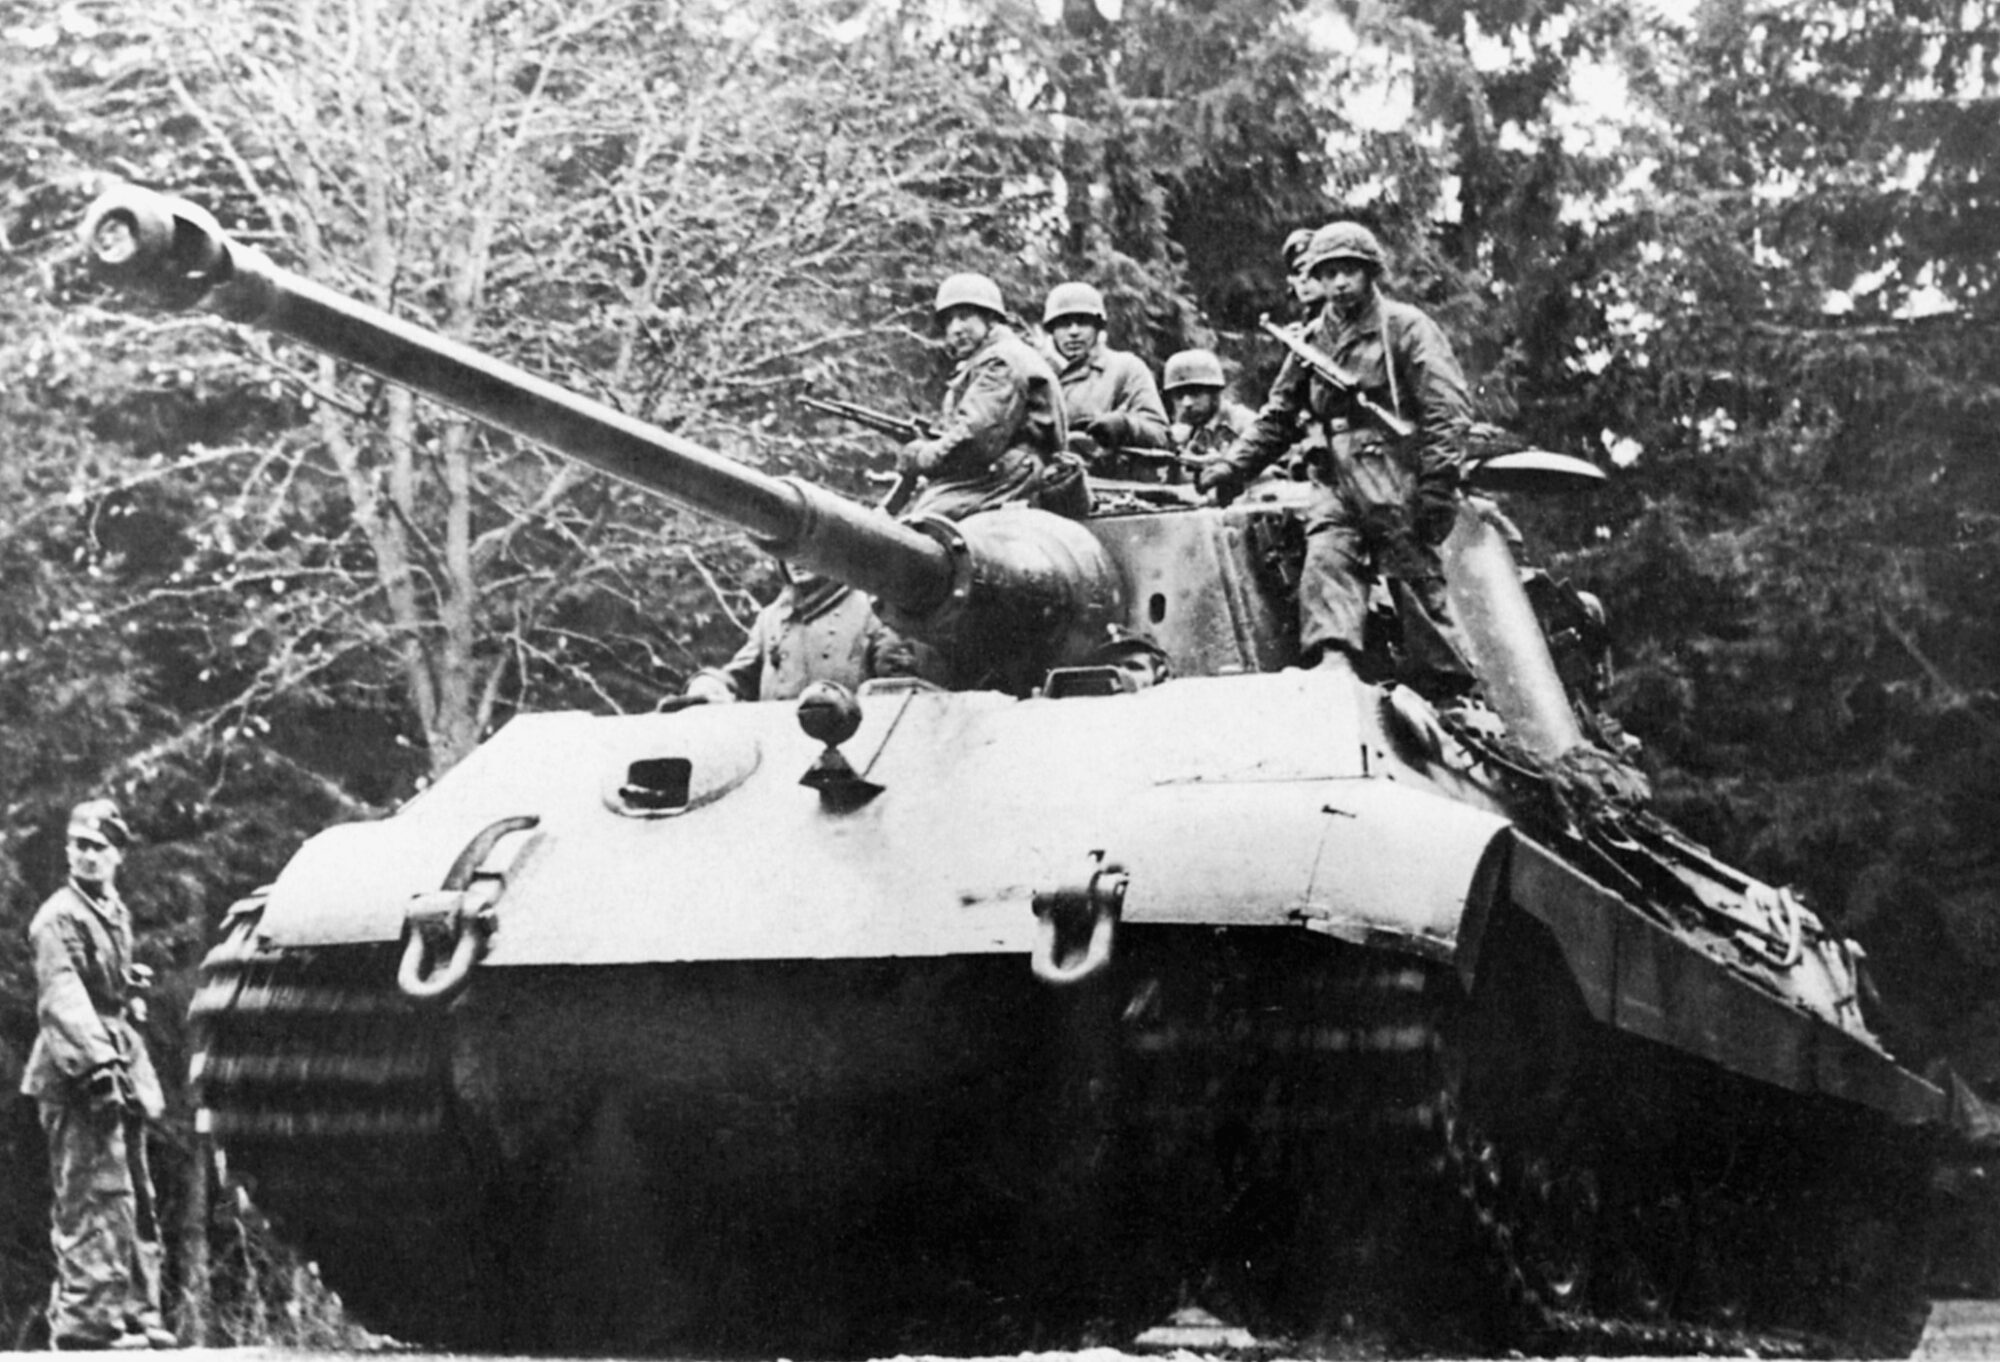 Sherman Tanks vs. Tiger Tanks: Which Was Best at the Bulge?